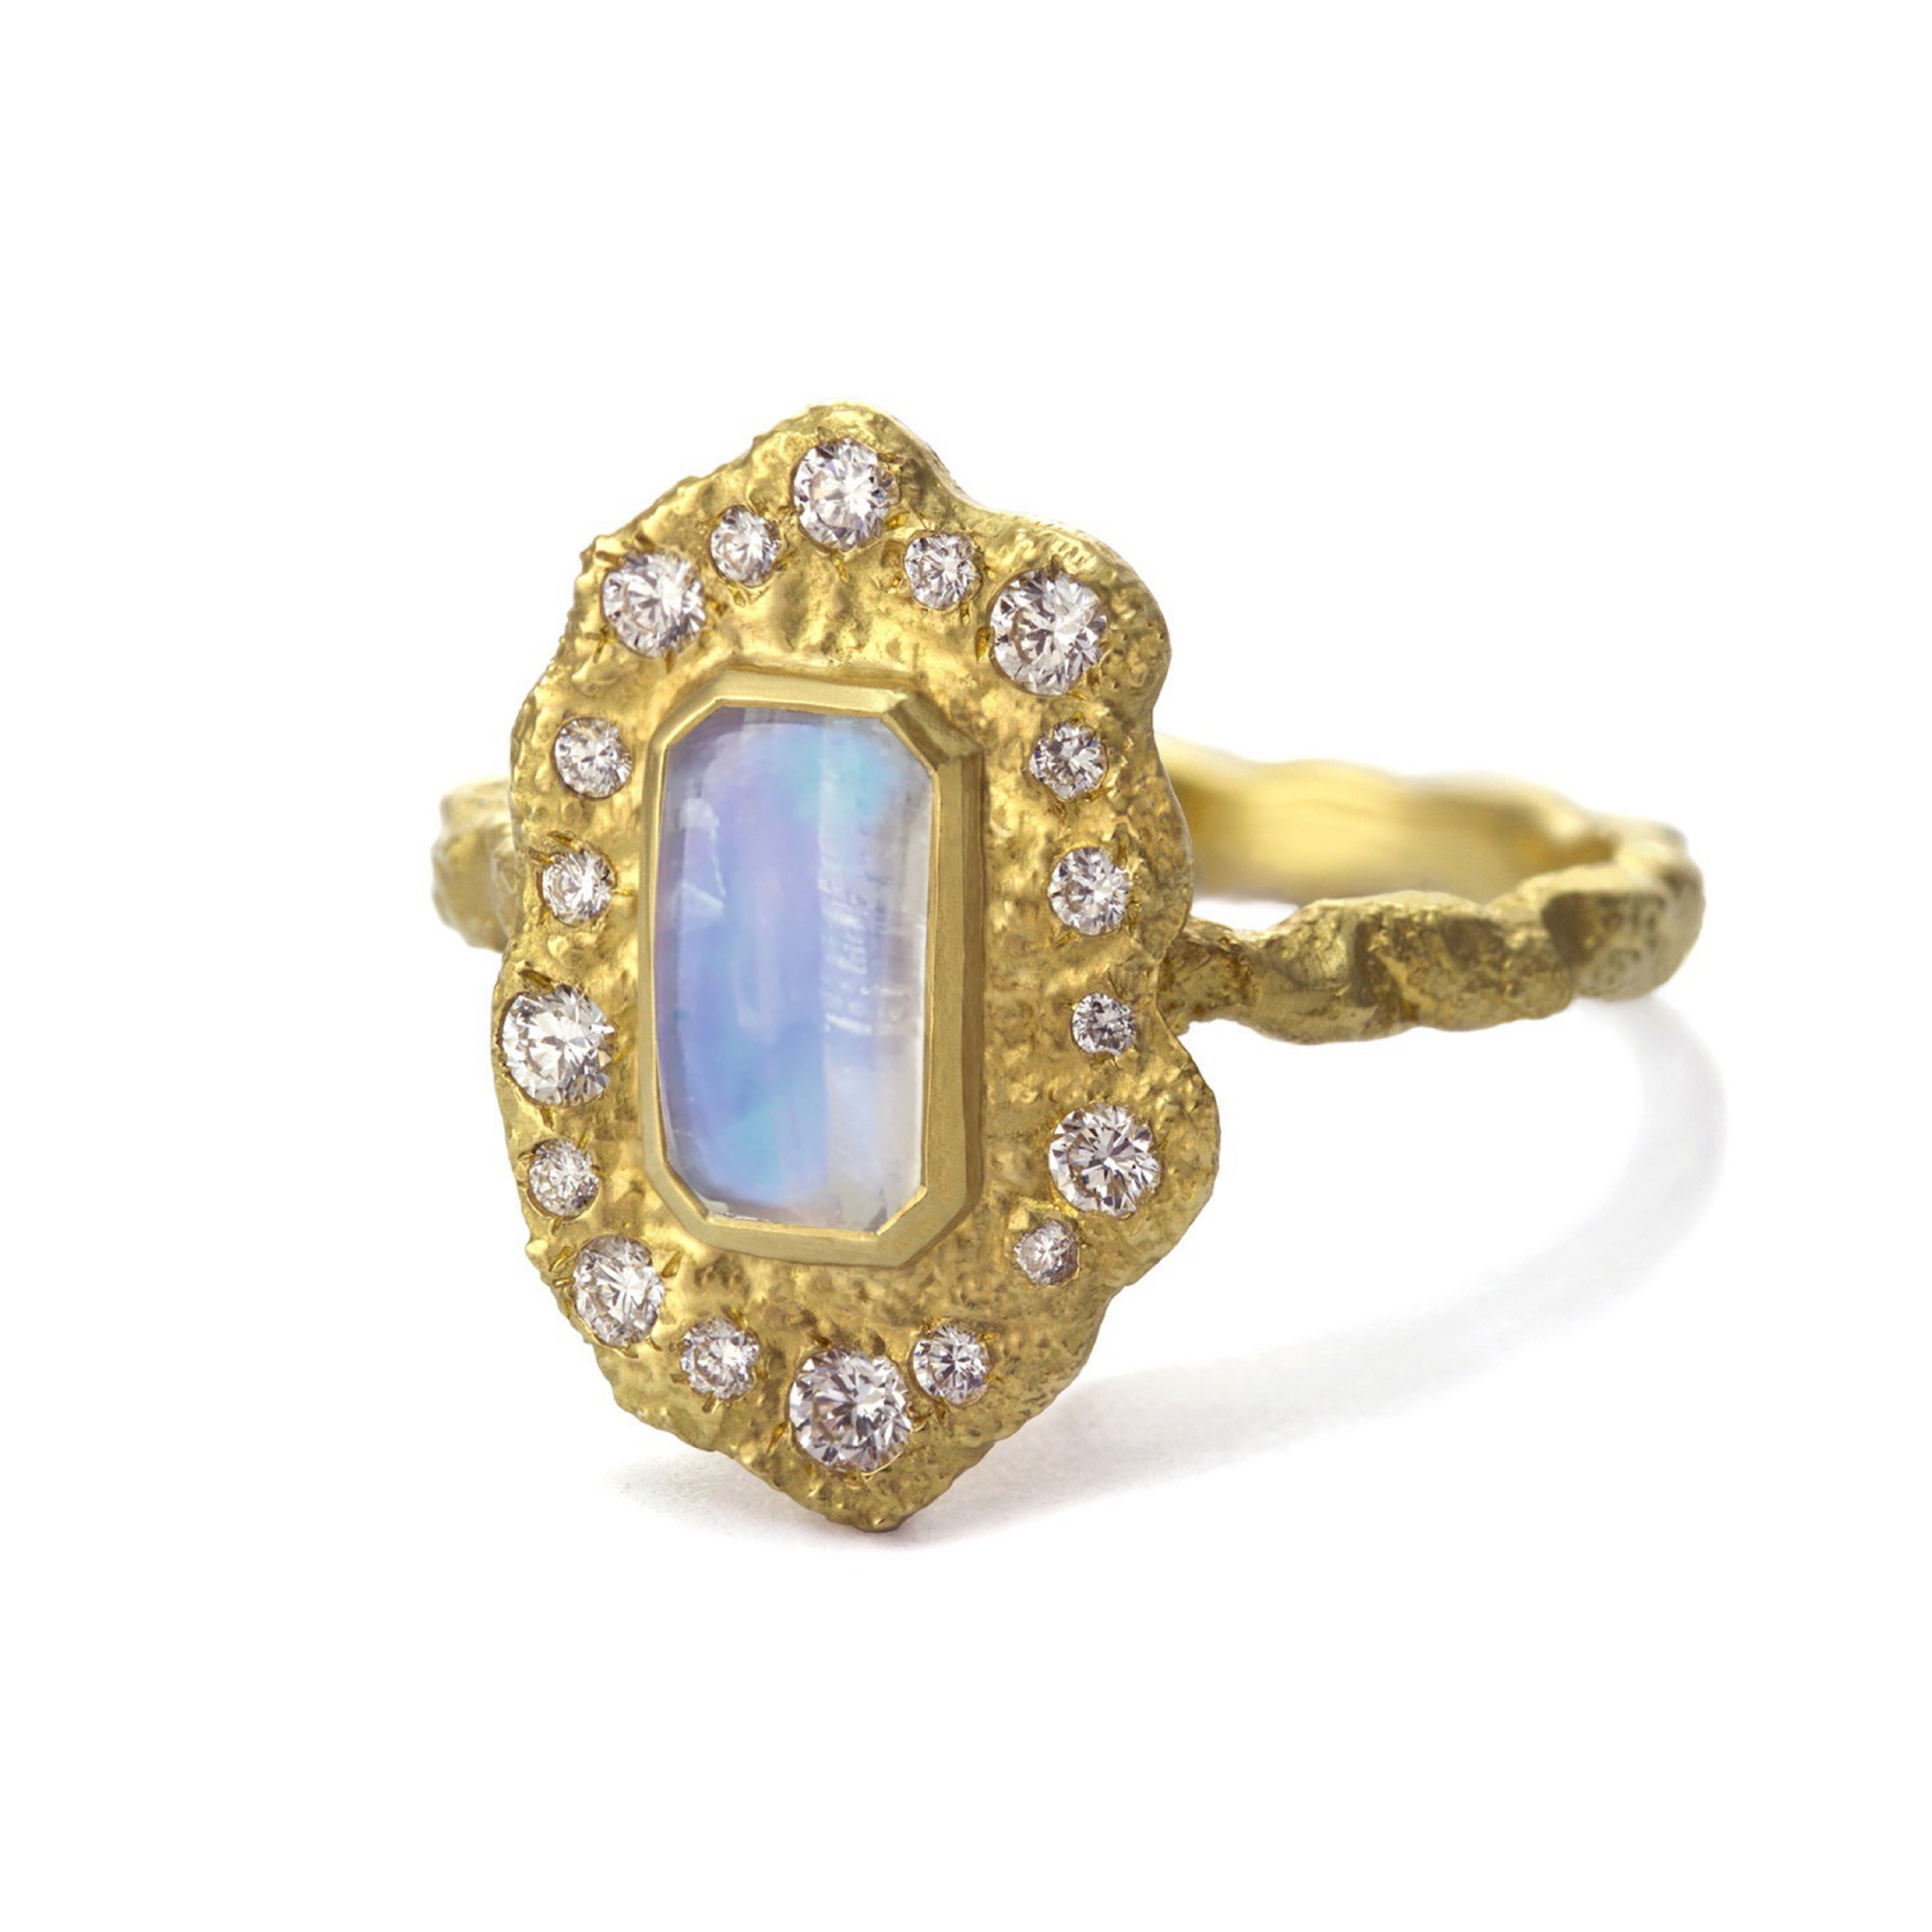 Rustic Moonstone Ring by Laurie Kaiser available at Talisman Collection Fine Jewelers in El Dorado Hills, CA and online. The Rustic Moonstone Ring exudes vintage charm with its elegant ruffle of 18k yellow gold and dreamy rainbow moonstone center. Accented with 0.27 cts of sparkling white diamonds, this ring is the perfect balance of timeless elegance and rustic charm. 